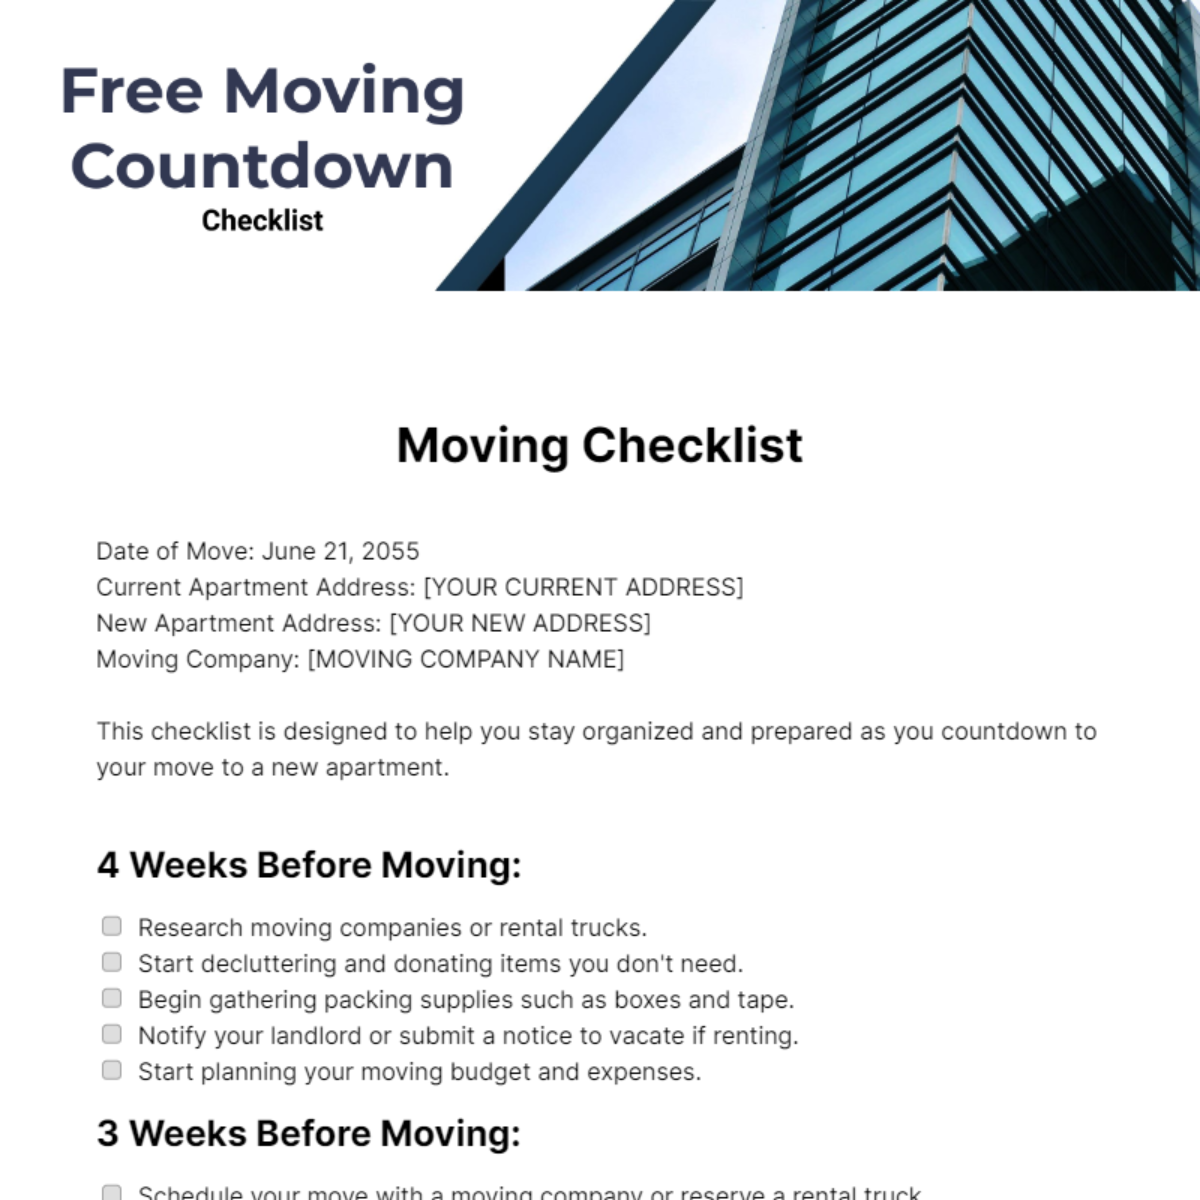 Free Moving Countdown Checklist Template